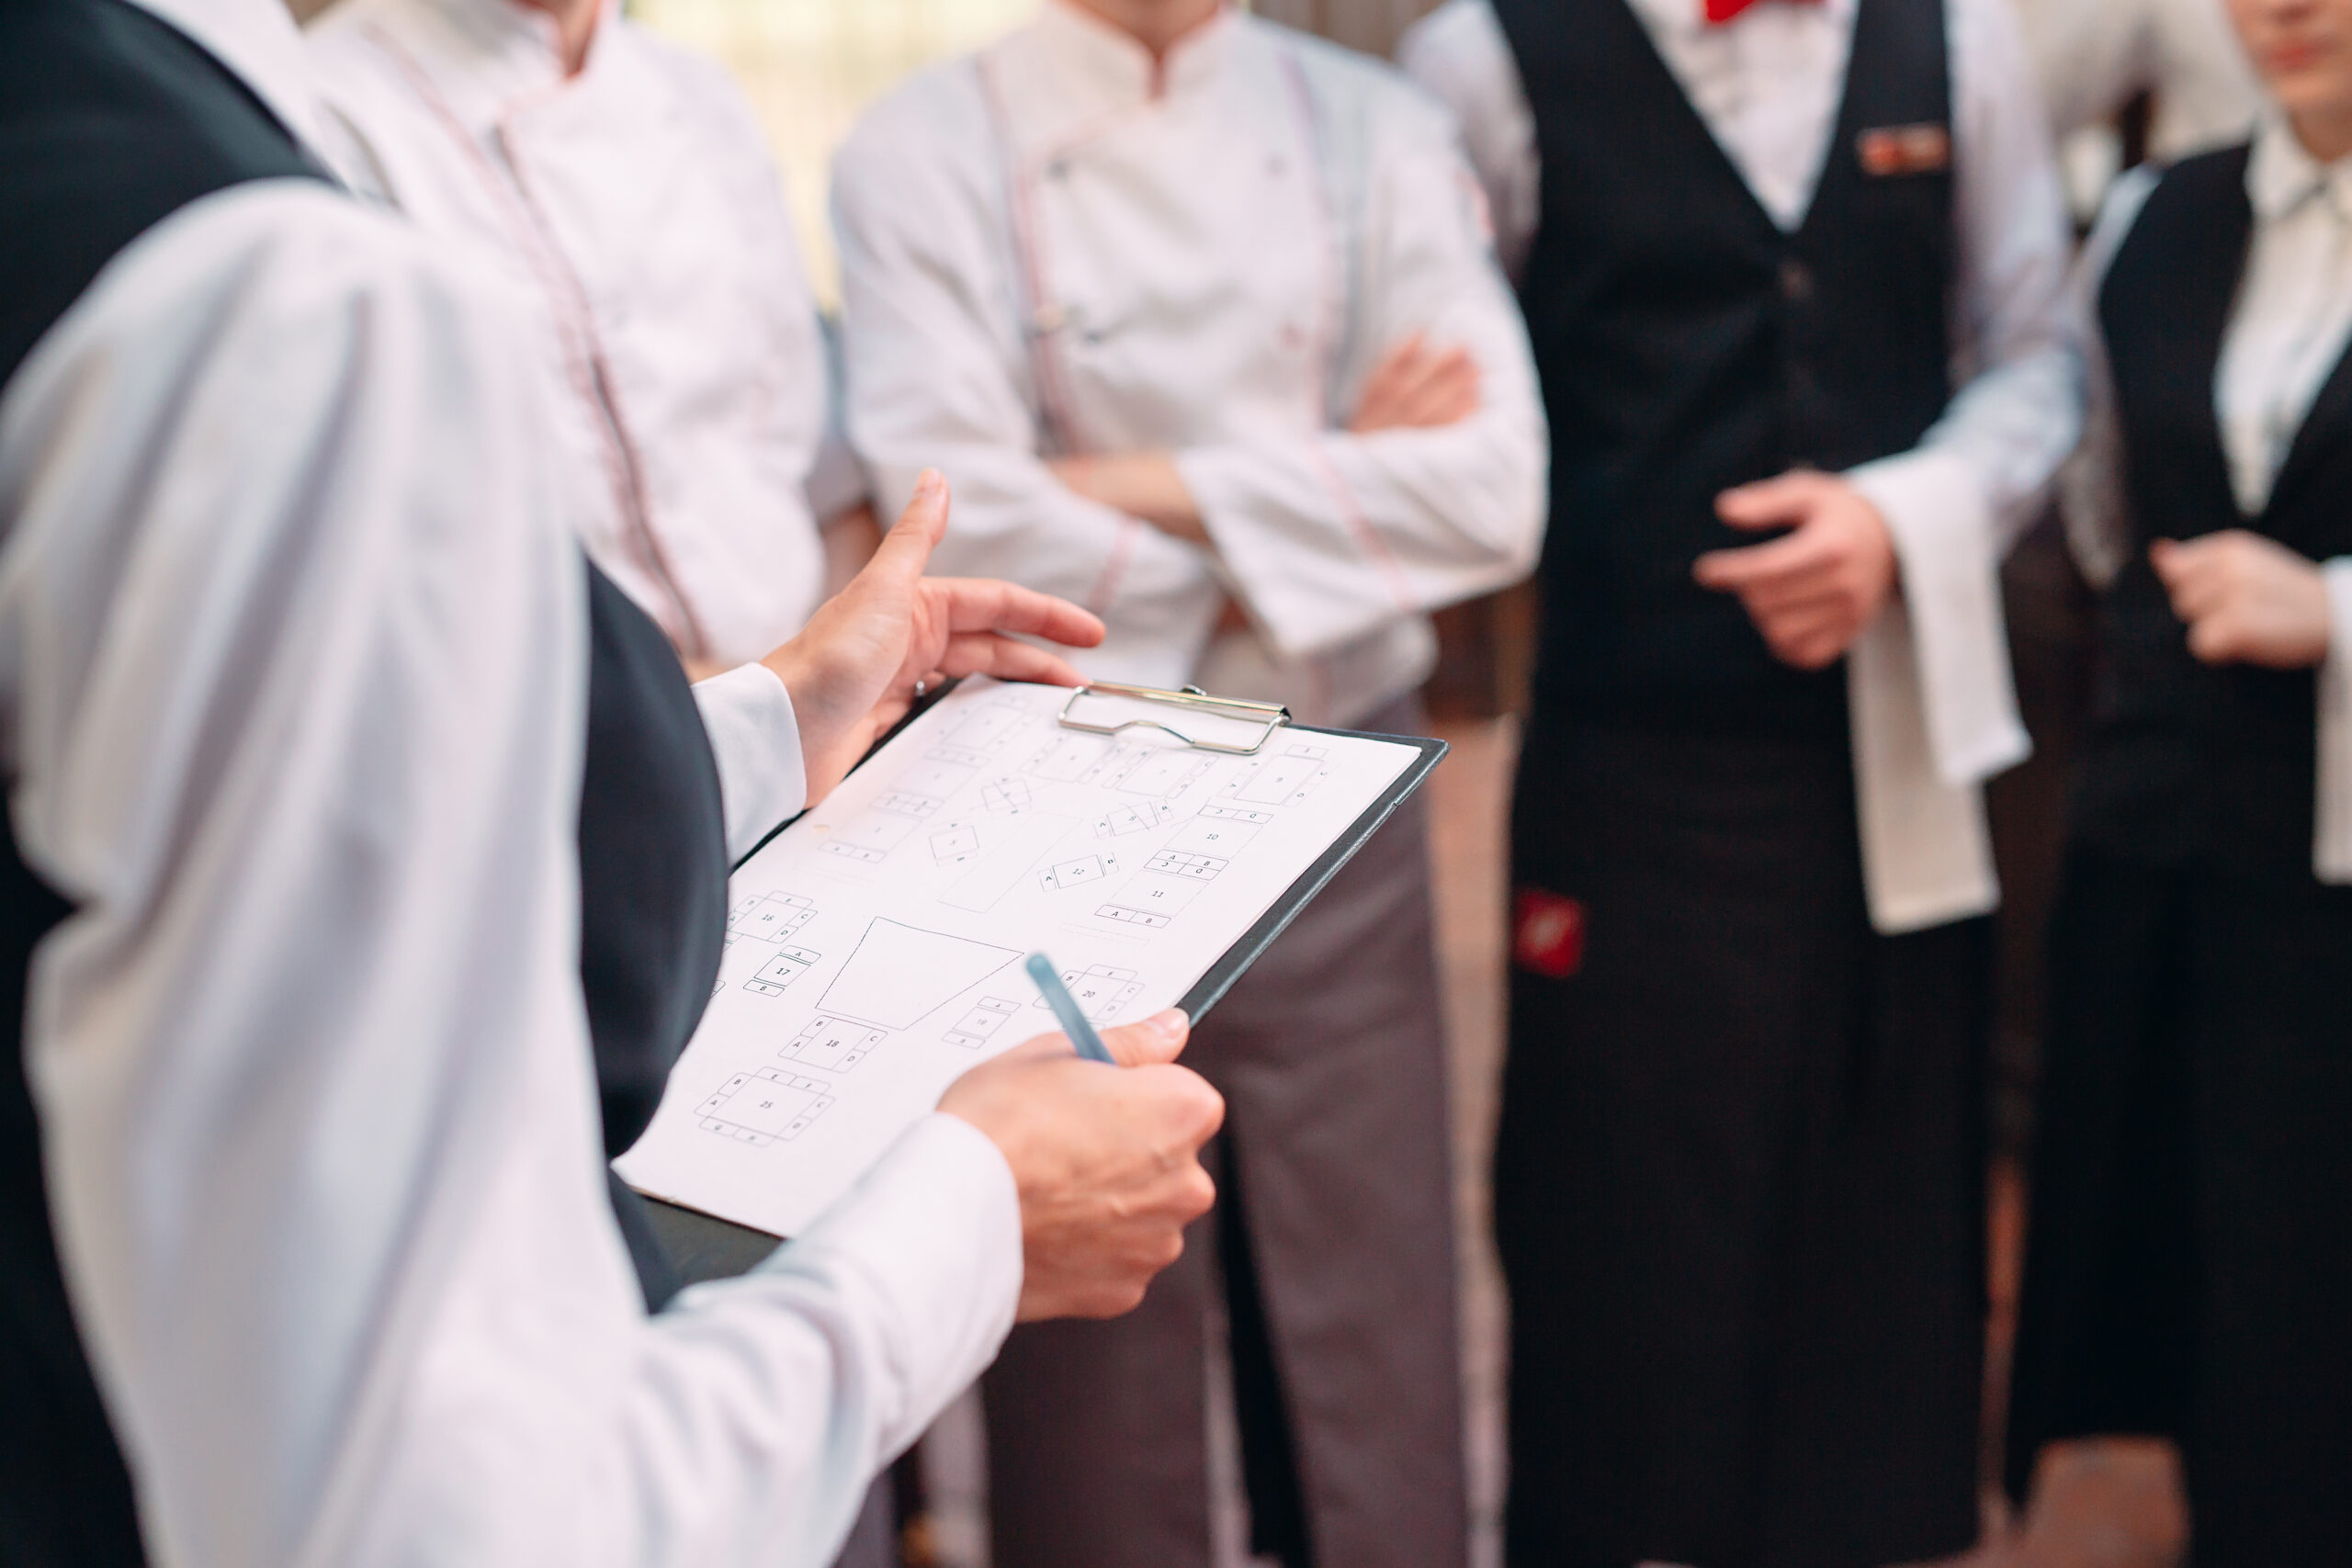 The best Guide to Follow for Training New Restaurant Staff